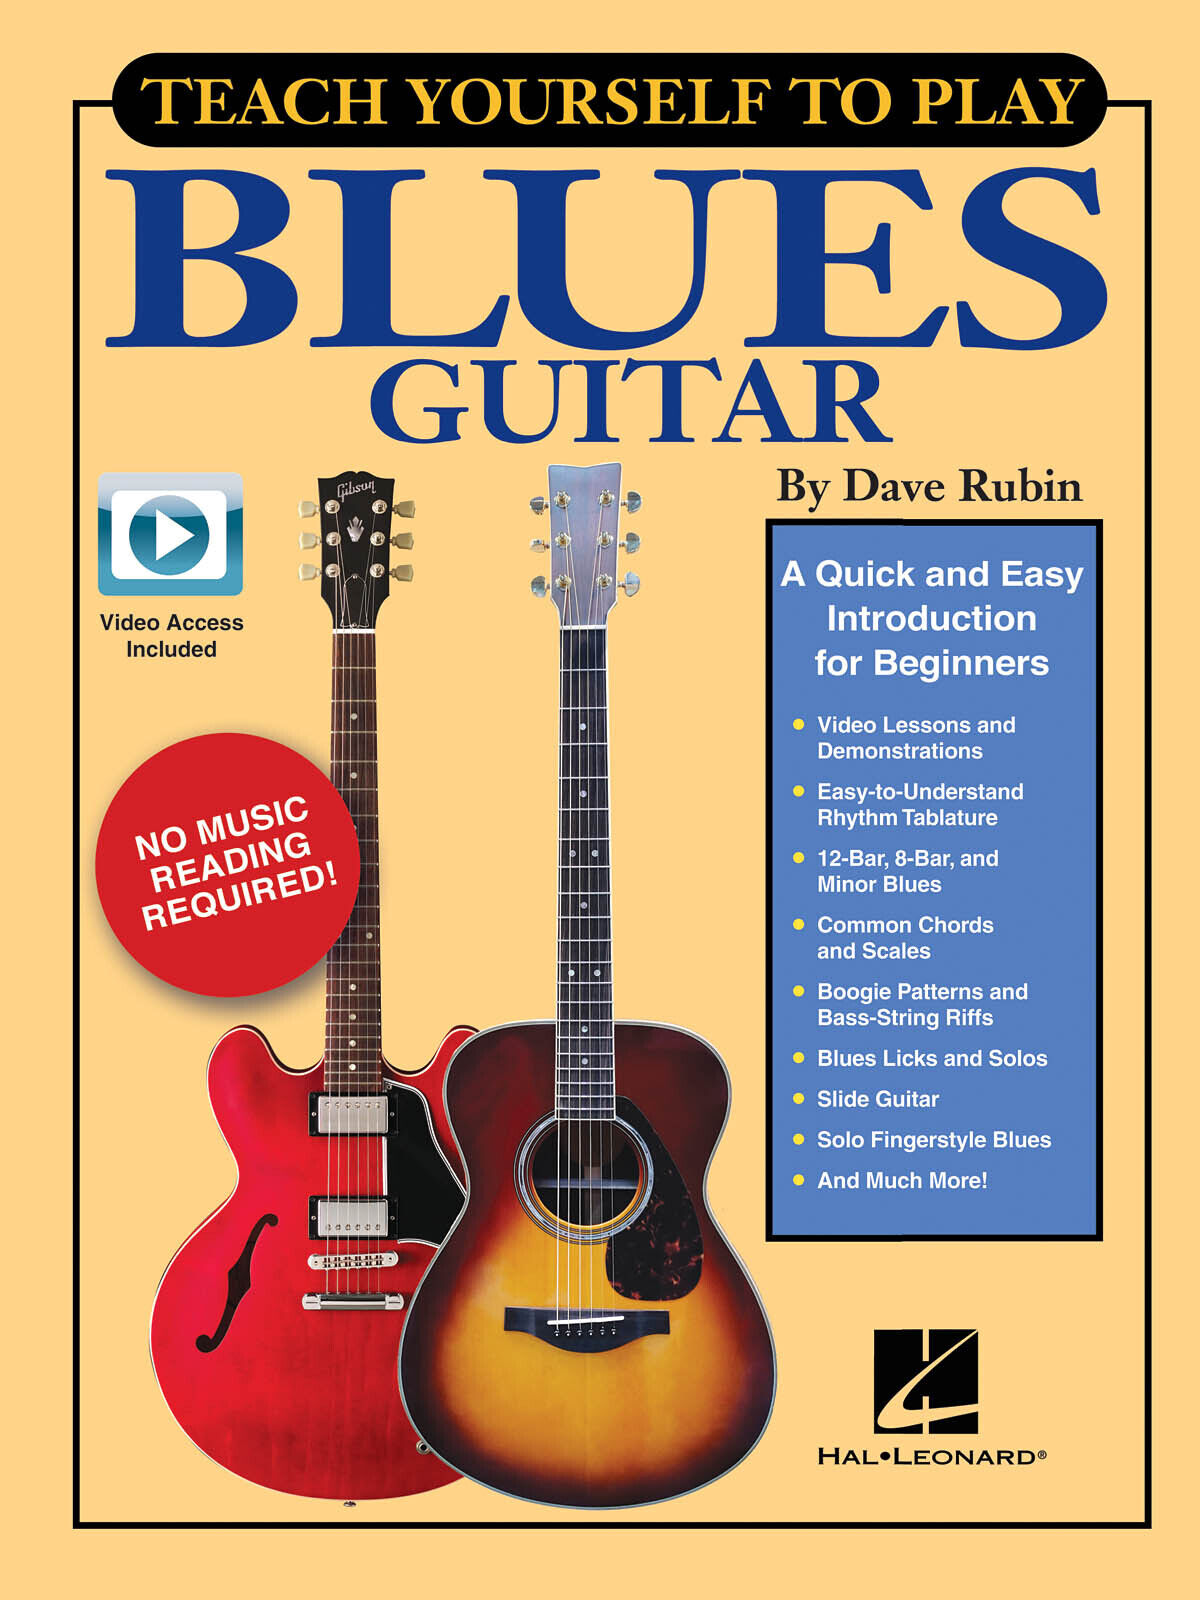 Teach Yourself Play Blues Guitar for Learn Lessons Tab Book & Video | eBay